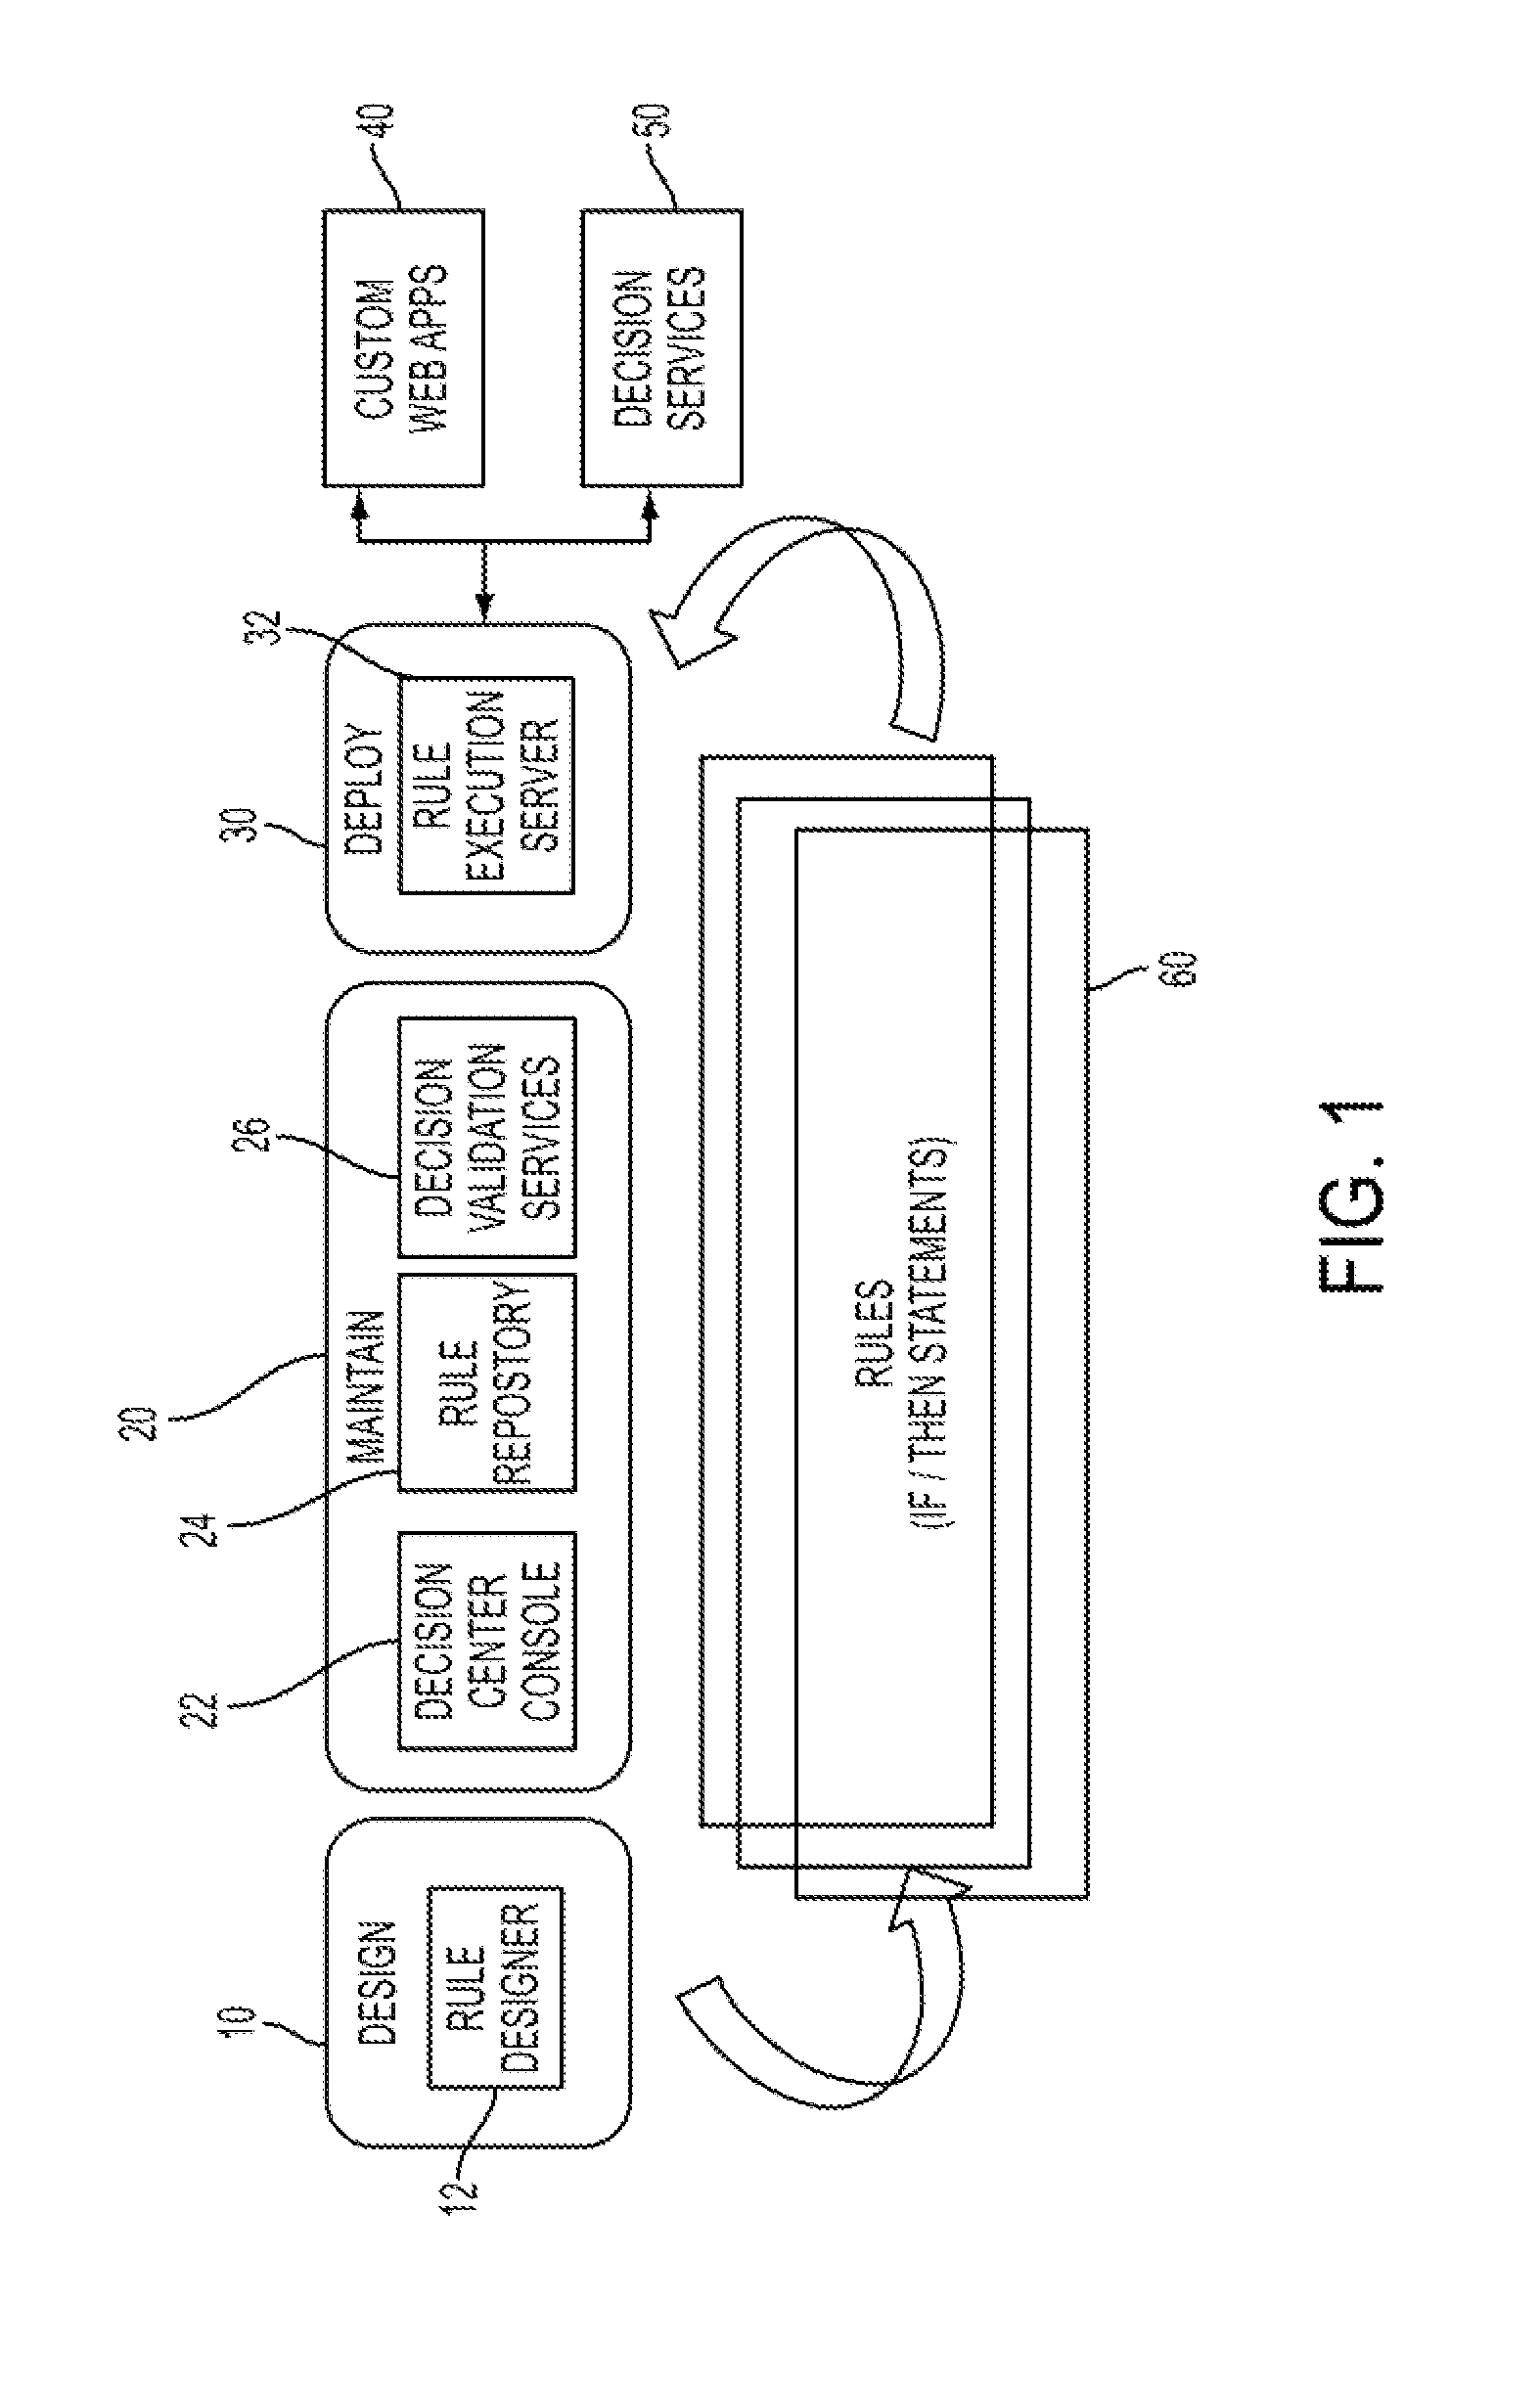 Method and apparatus for generating test scenarios for a set of business rules